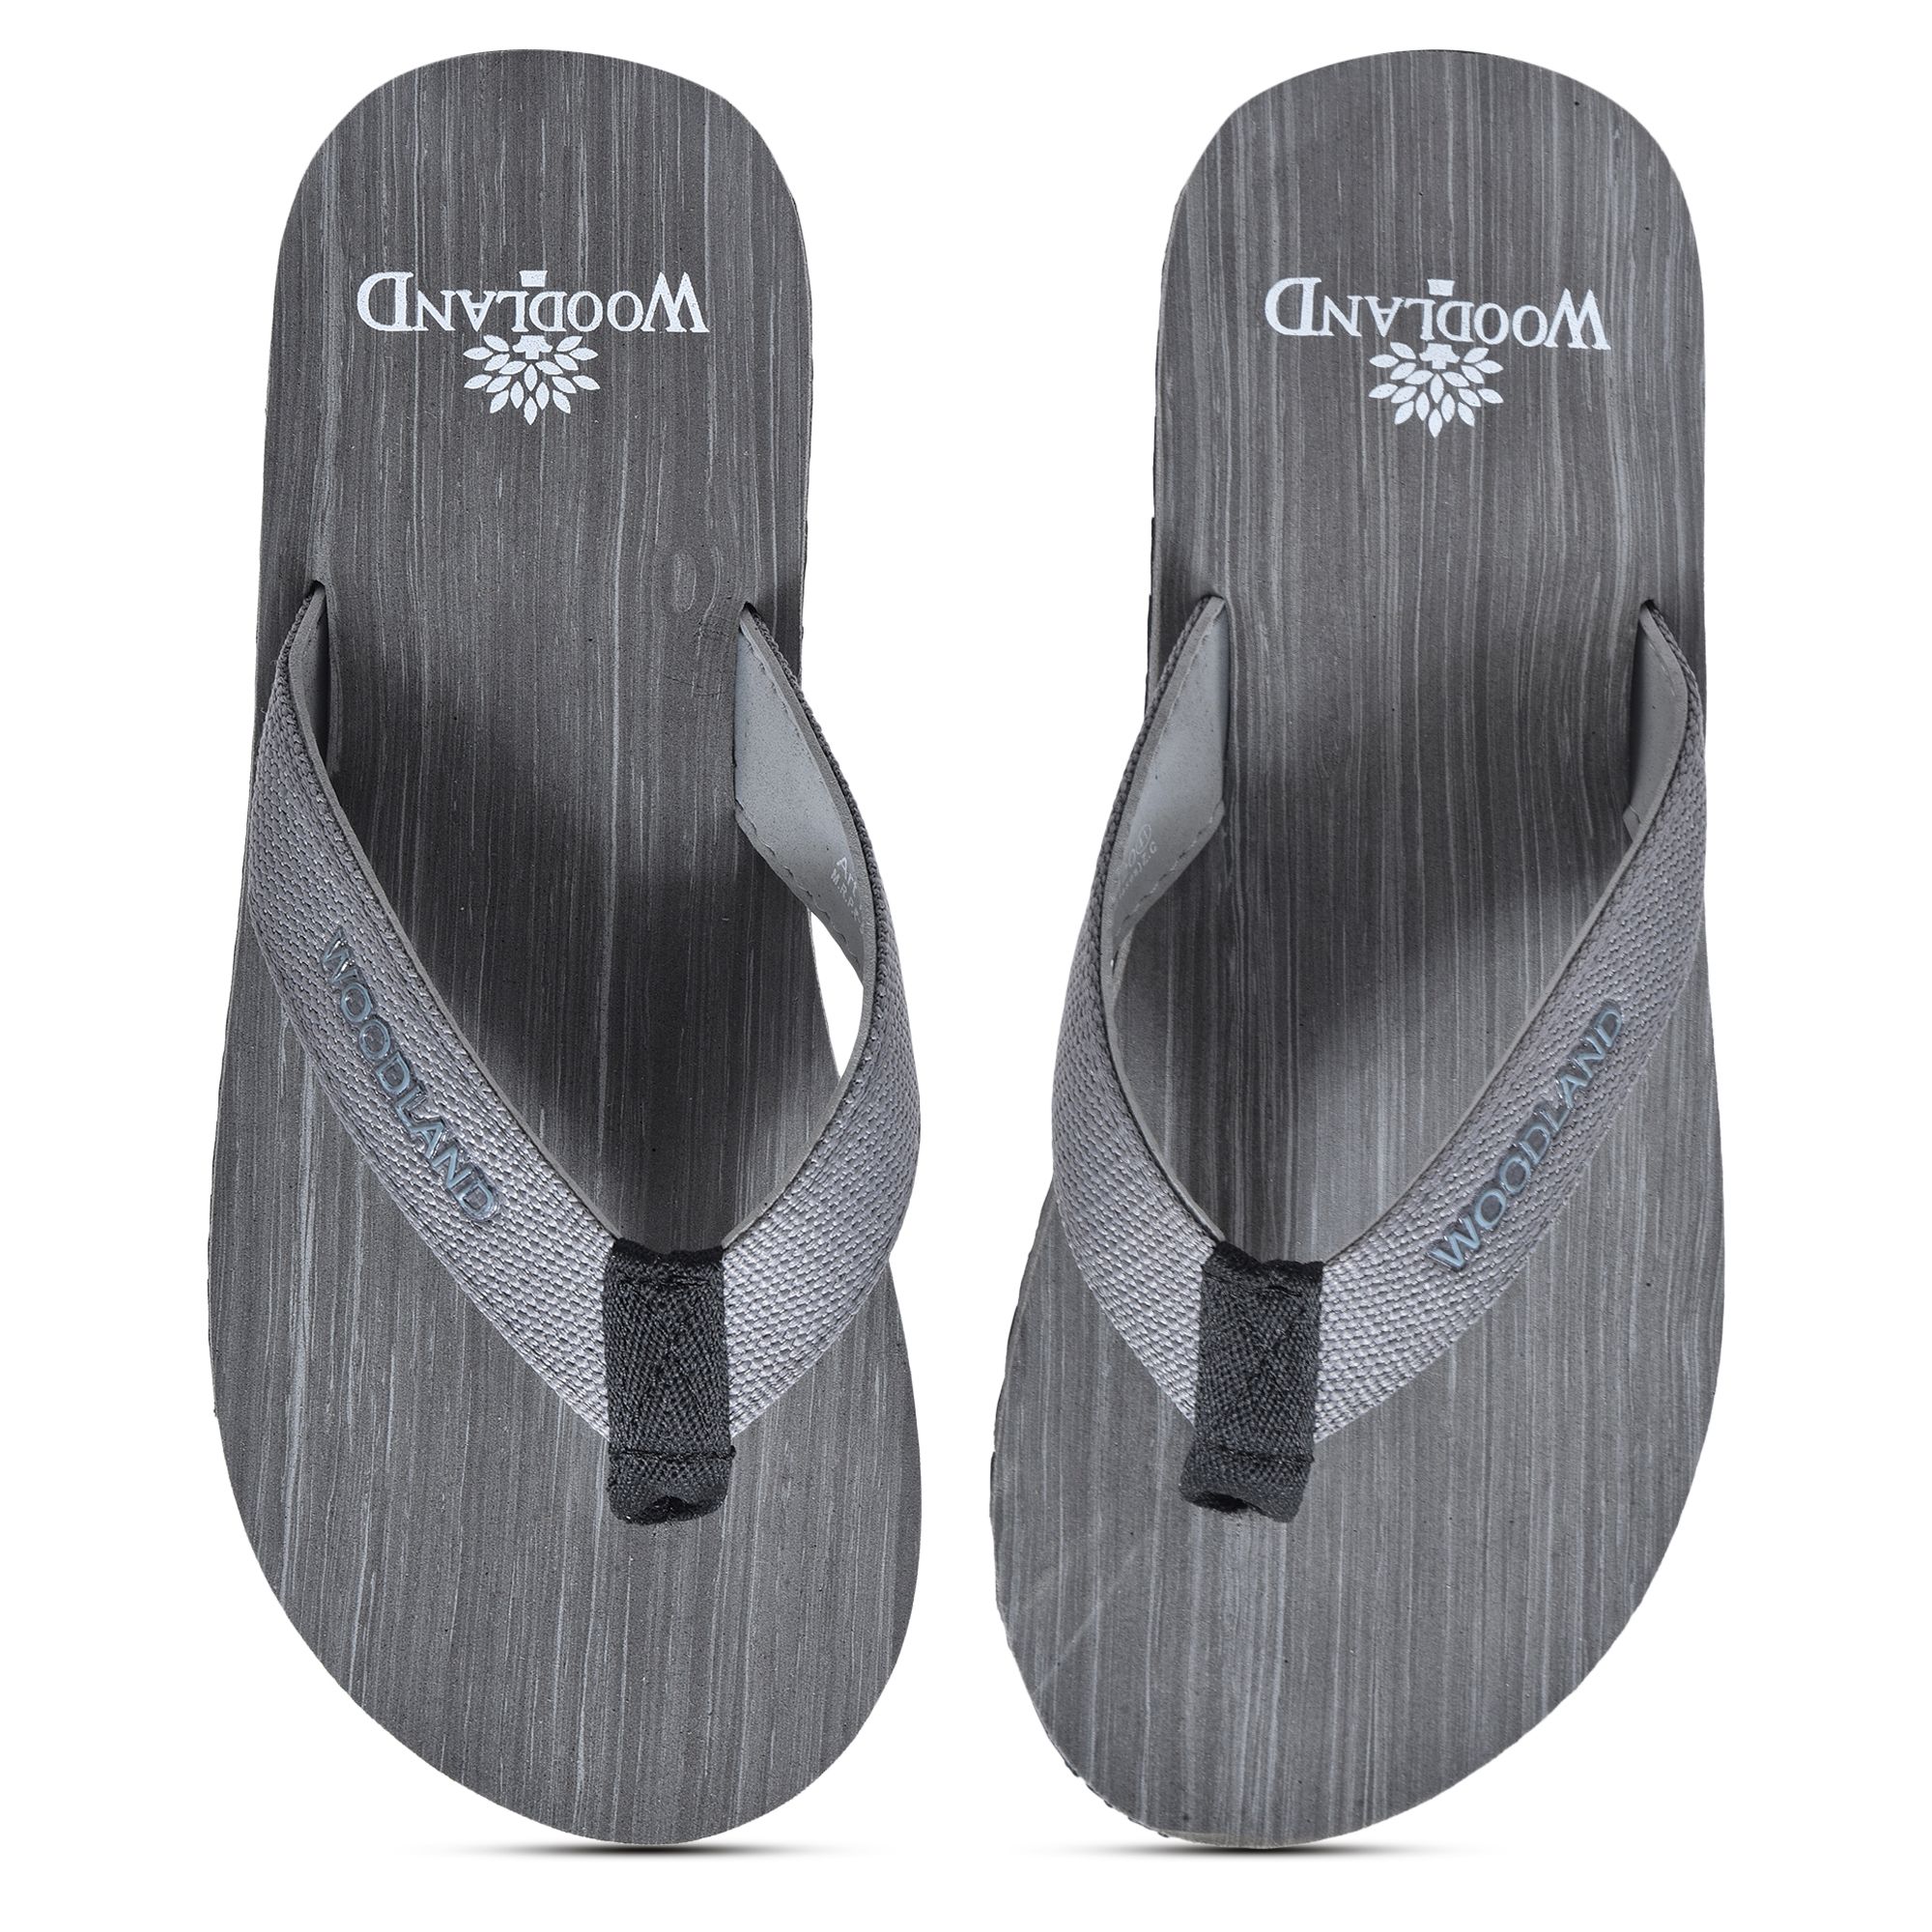 dgrey grey flip flop for men 267 mrp 595 55 % off prices include taxes ...